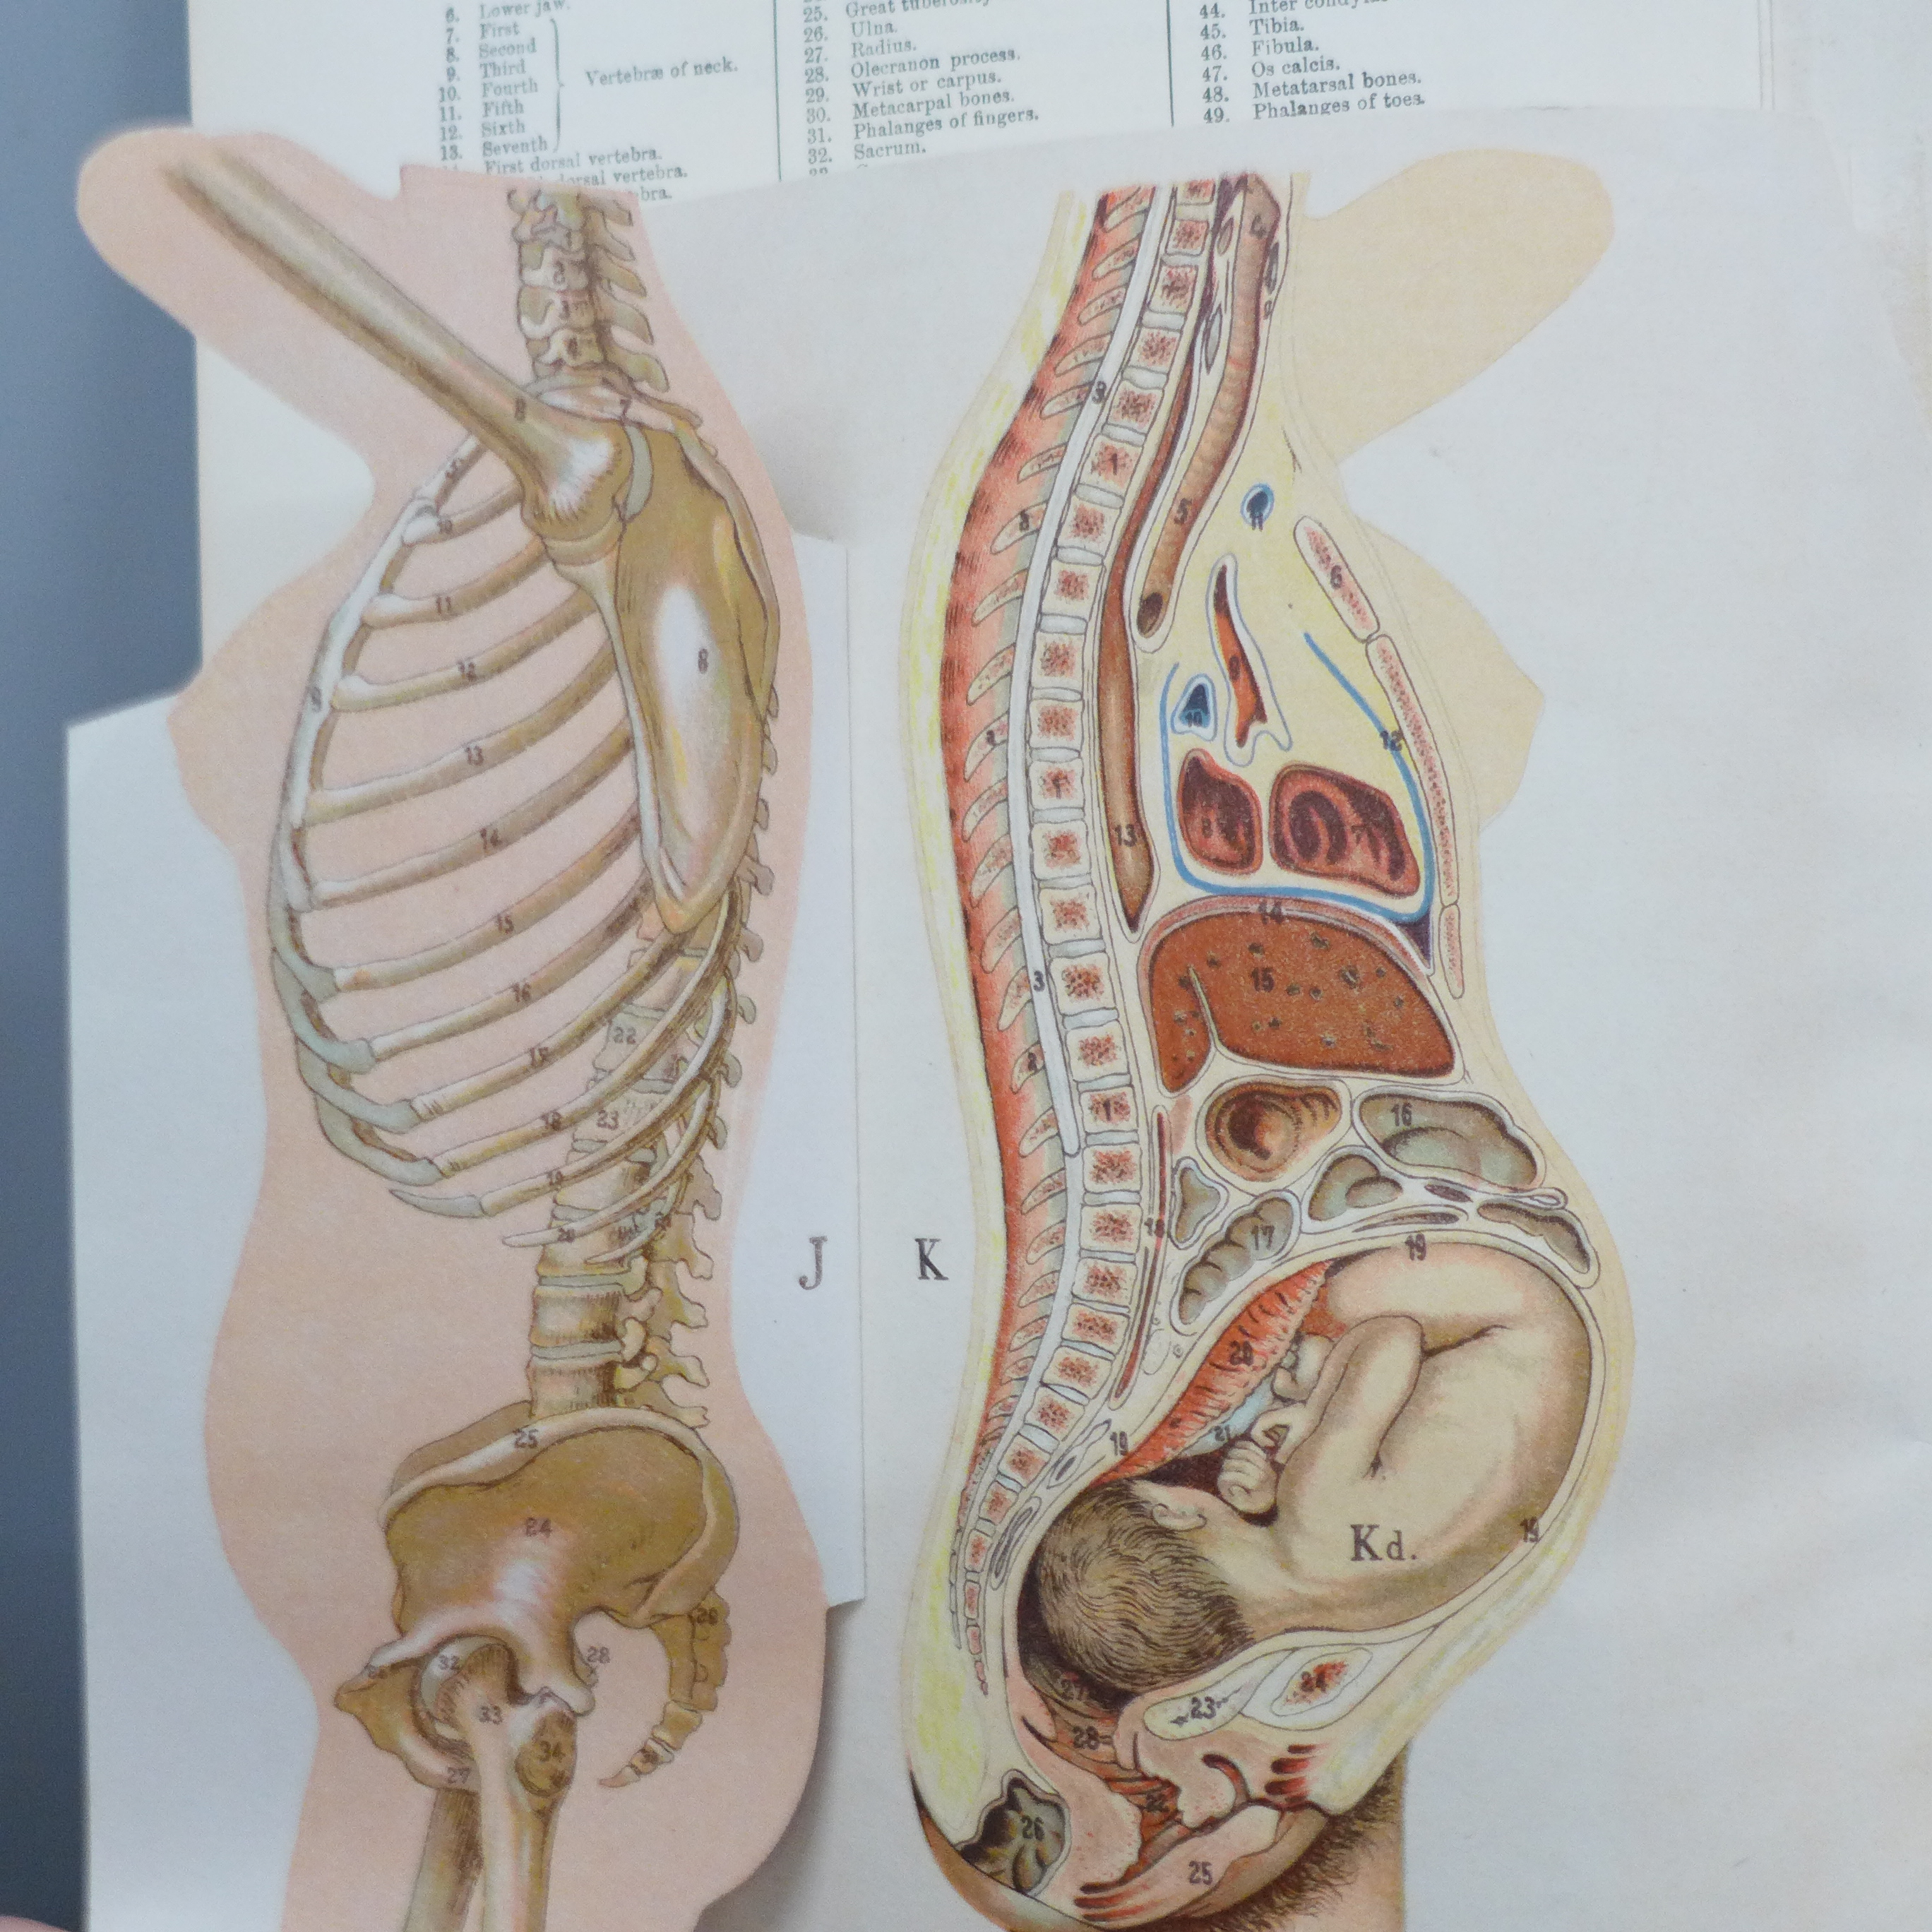 A Philips' Model of the Human Body (female) illustrated and edited by W.S. Furneaux - Image 5 of 8